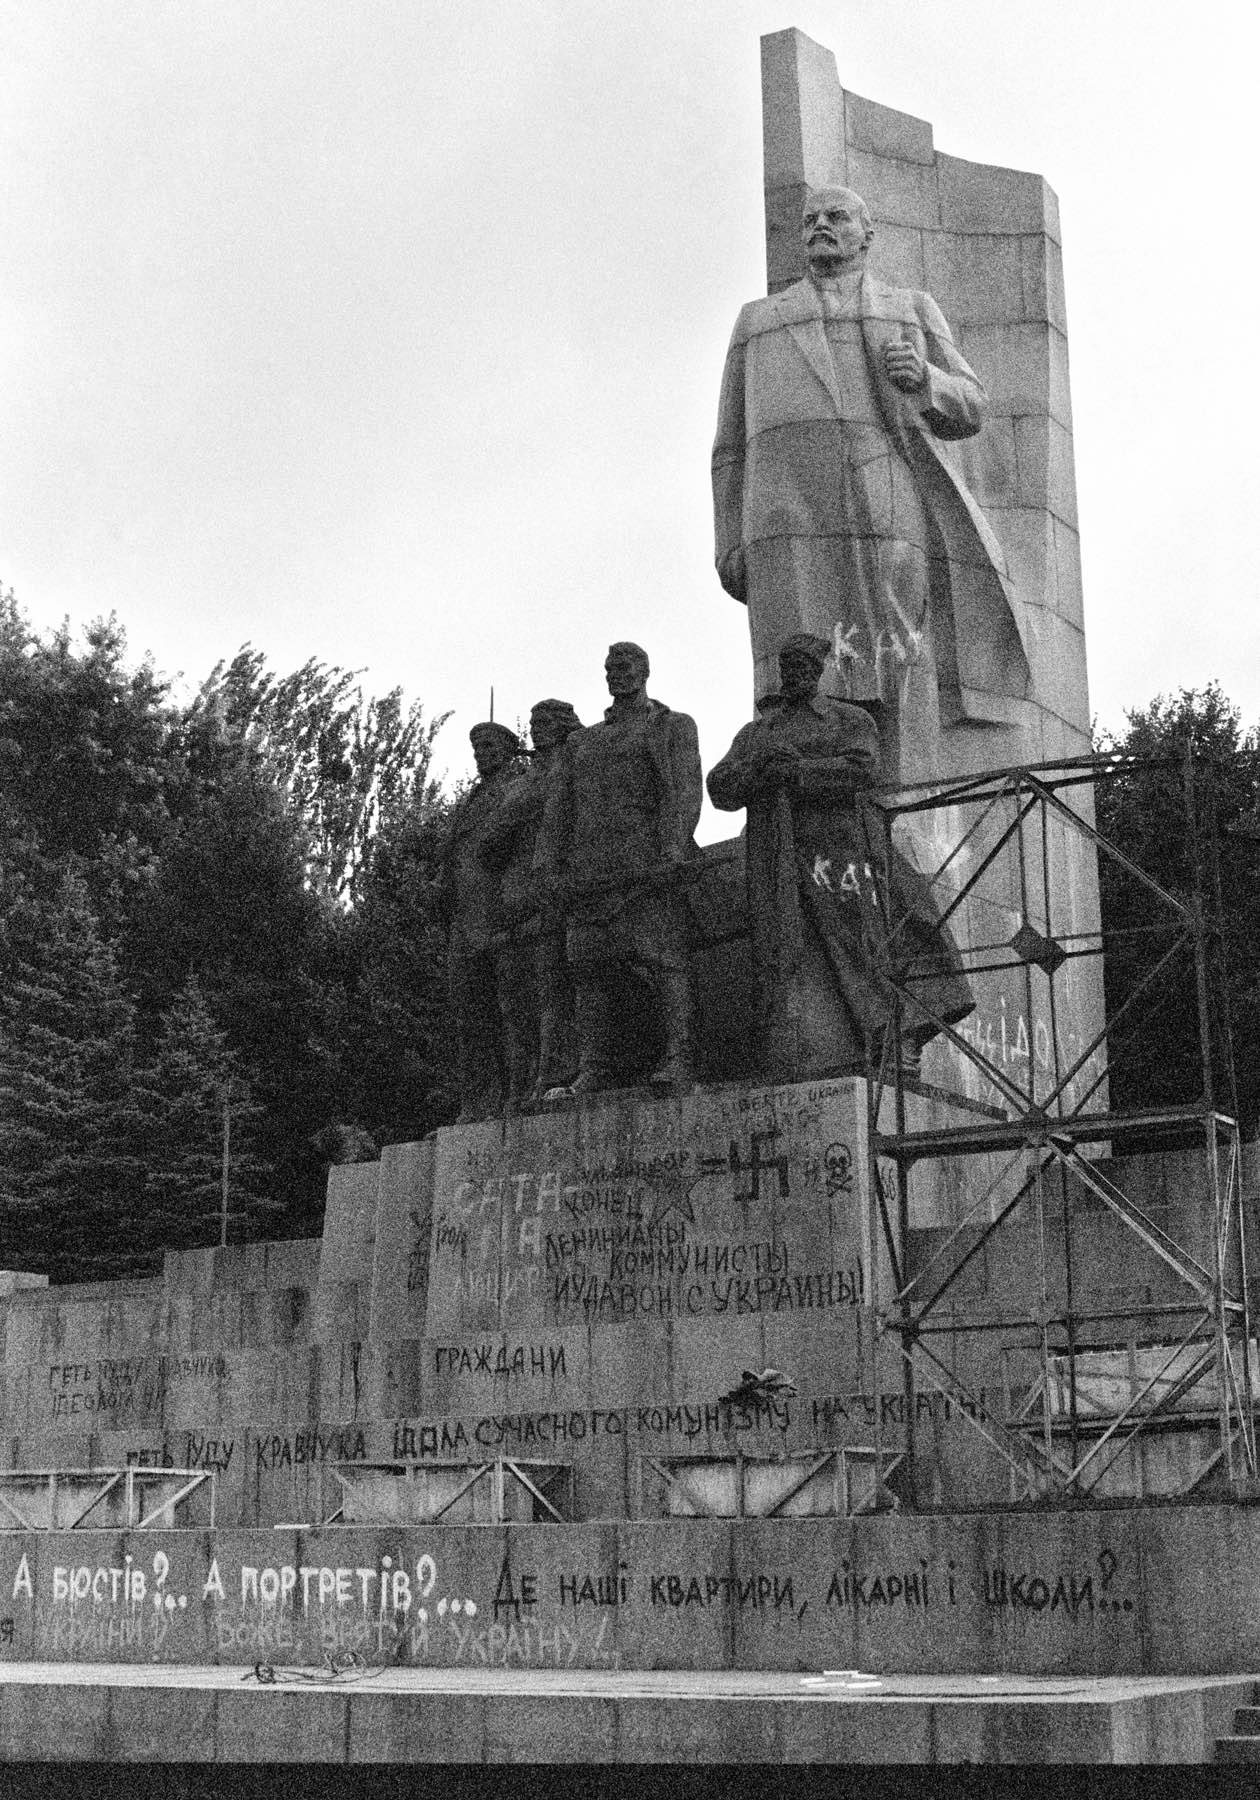 Ukraine, 1991. The inscriptions on the monument read: “End Leninism” and “Where are our houses, hospitals and schools?”